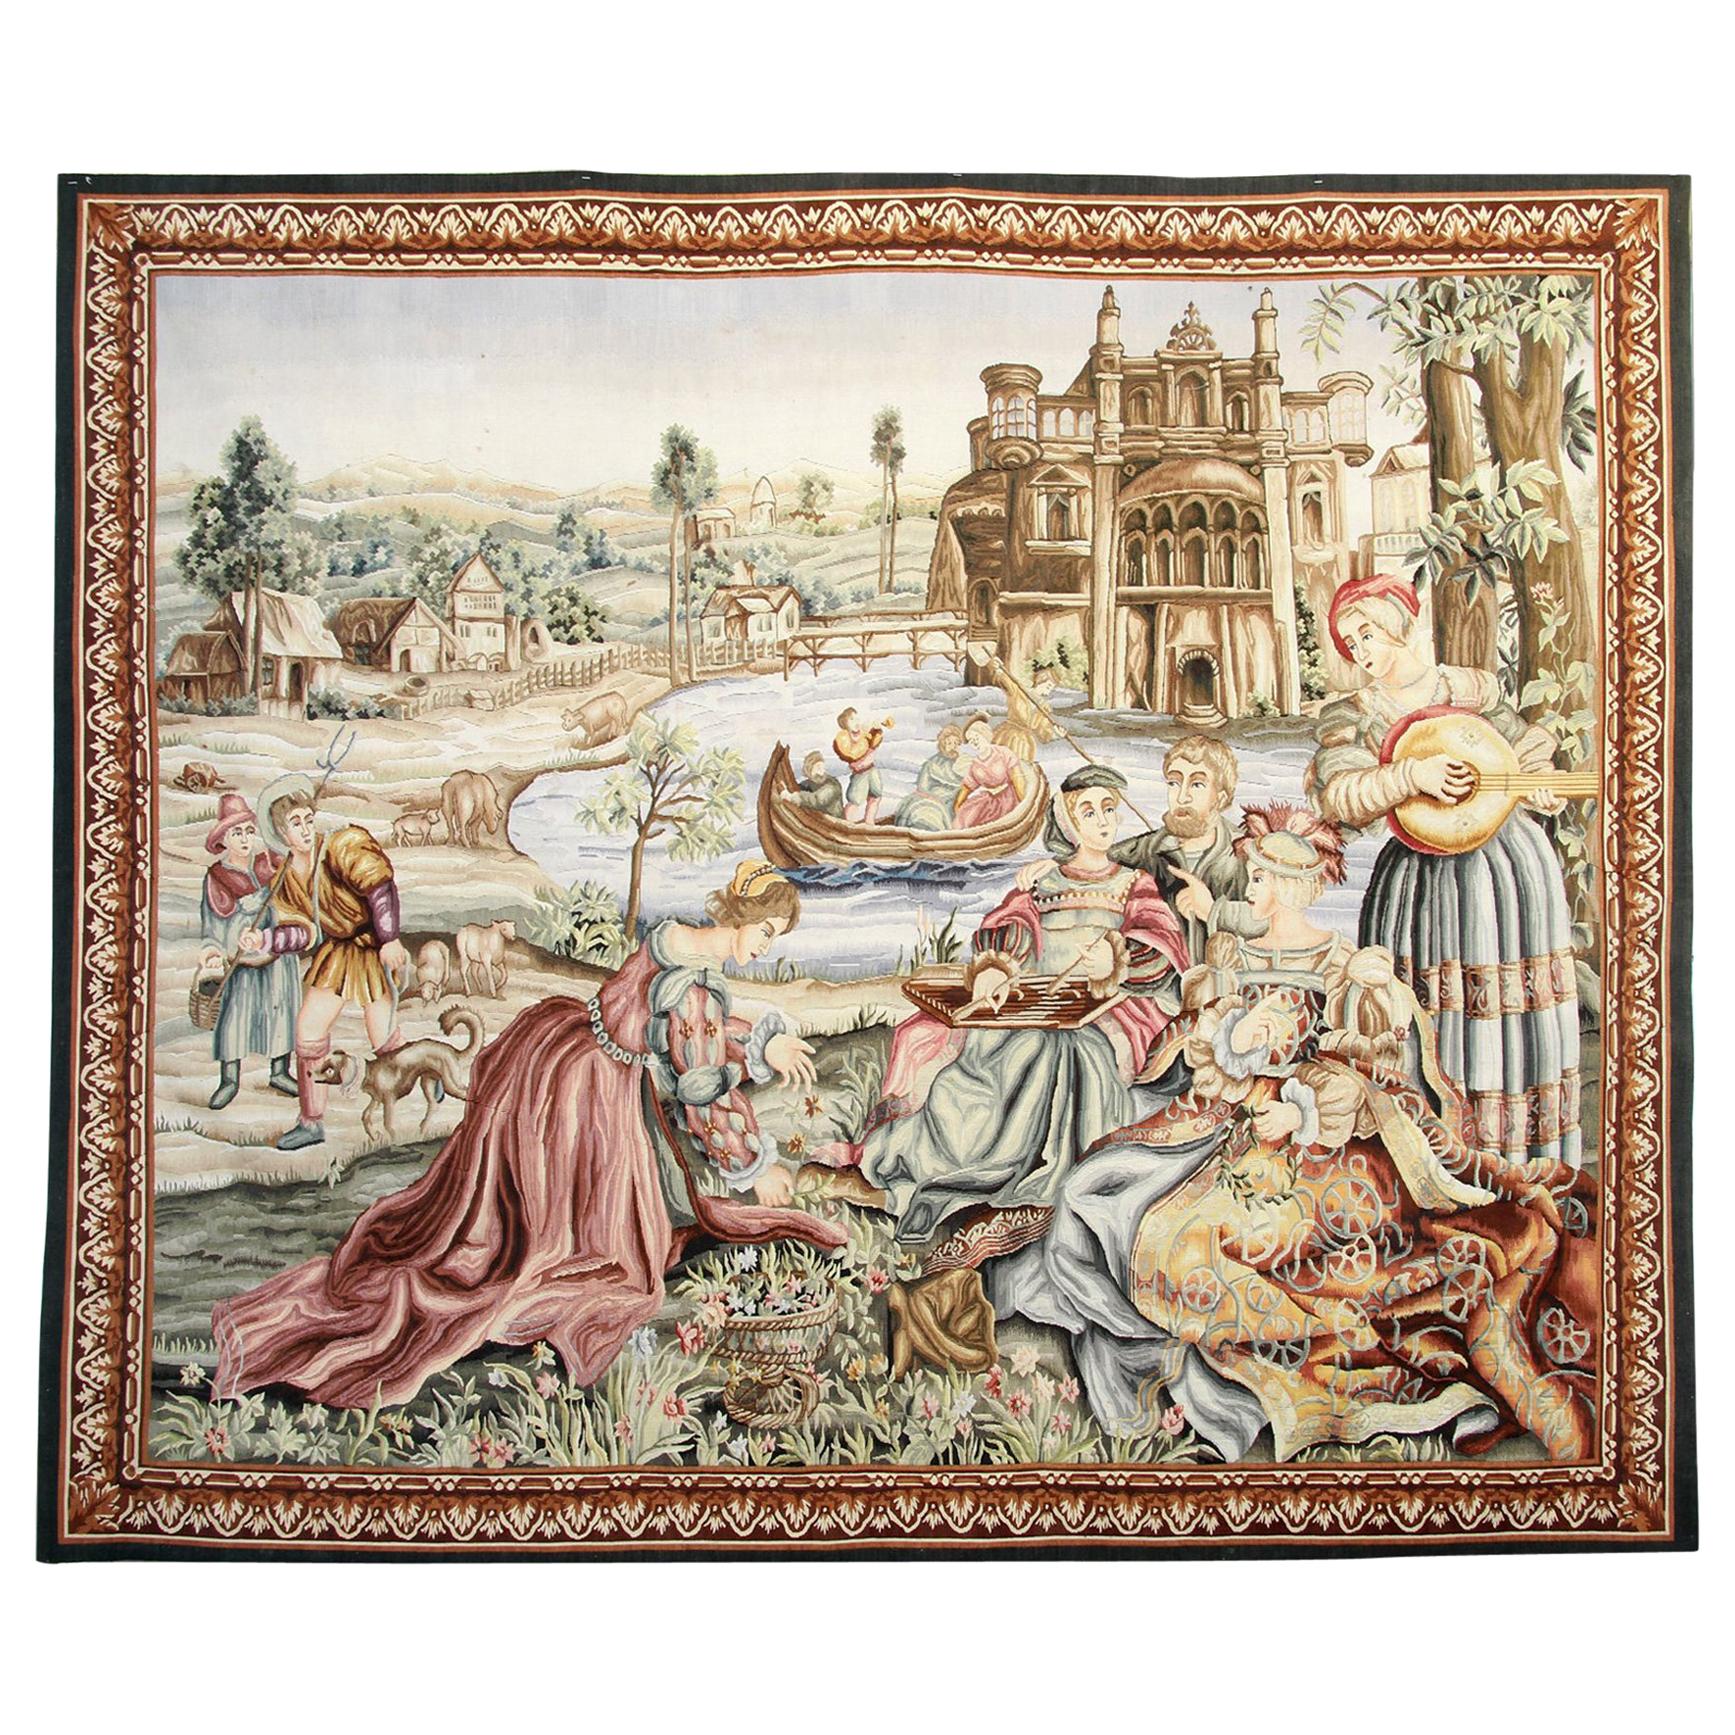 Vintage Rugs, Tapestry Flemish Wall Decoration Object, Decorative Rugs for Sale